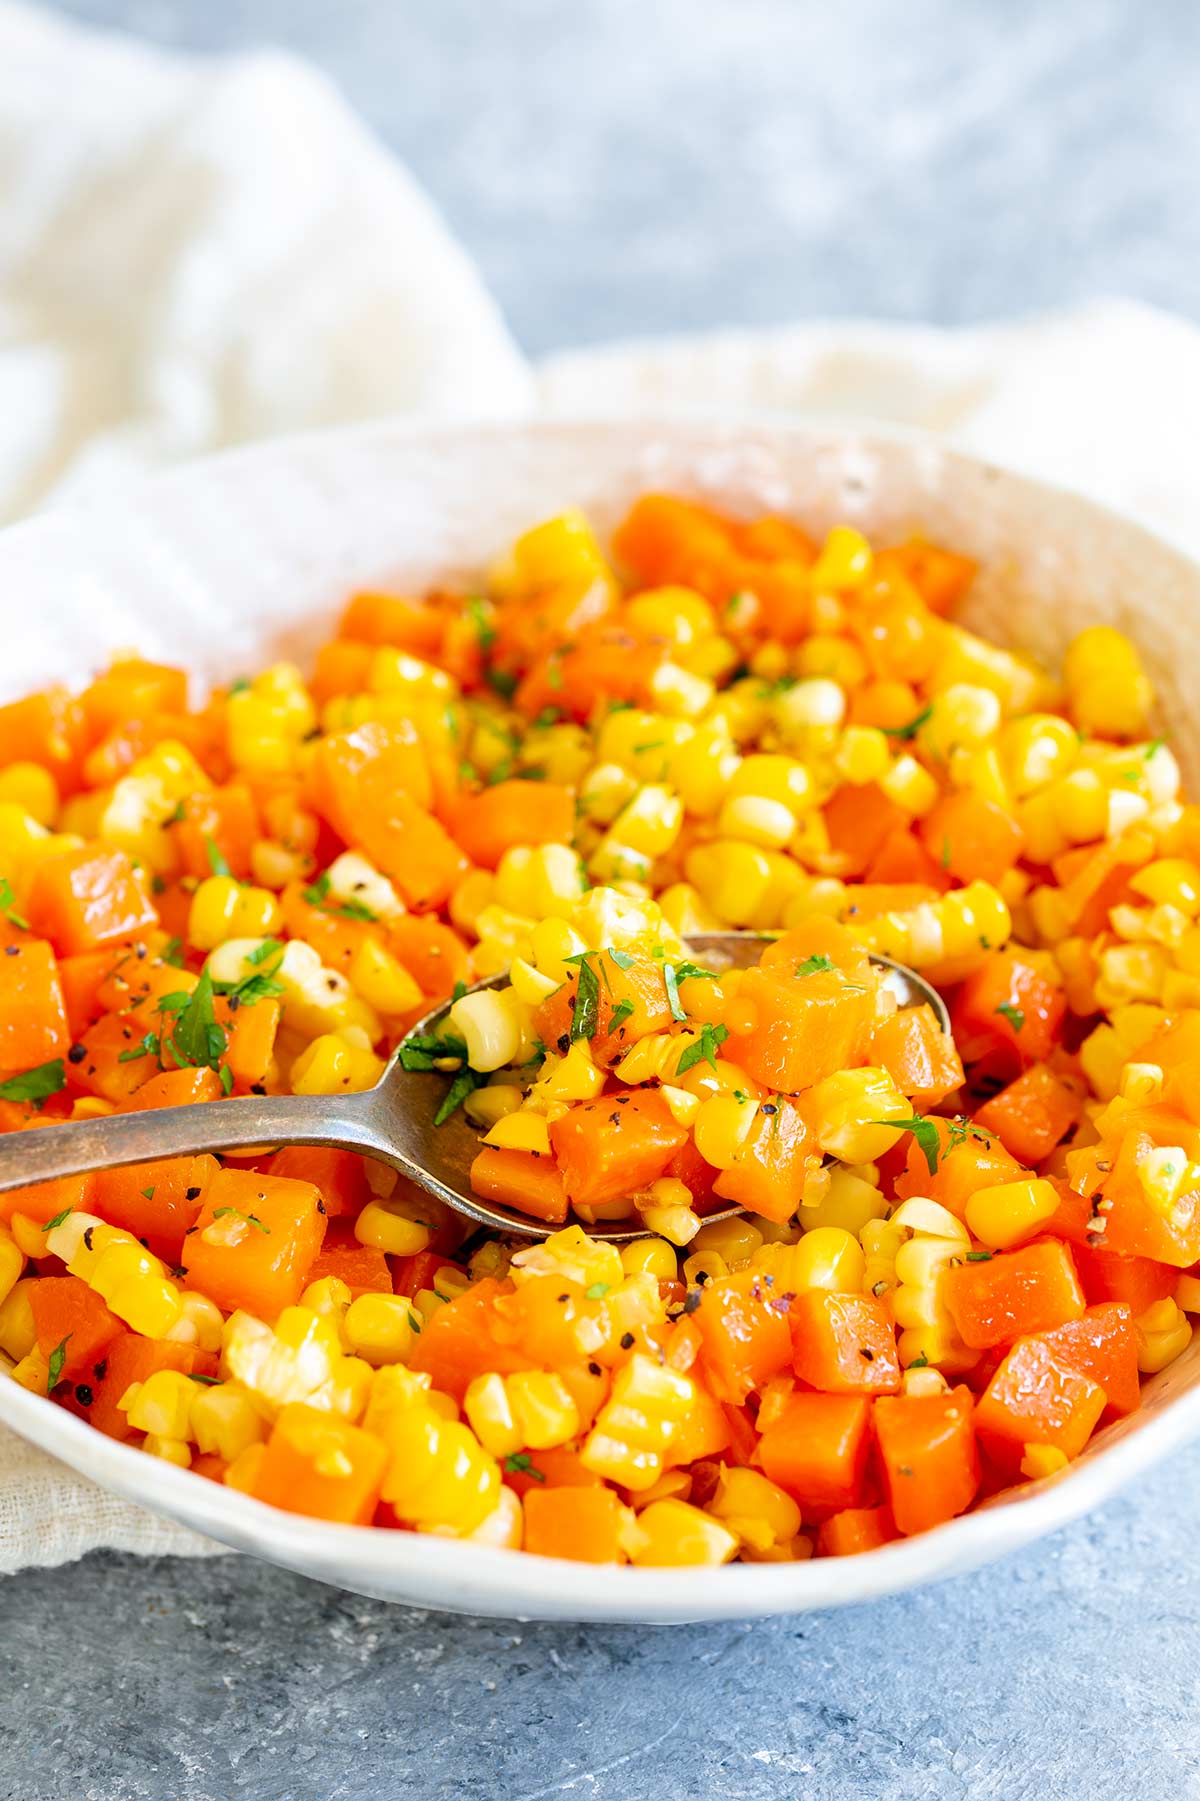 a spoon scooping up carrots and corn from a white bowl